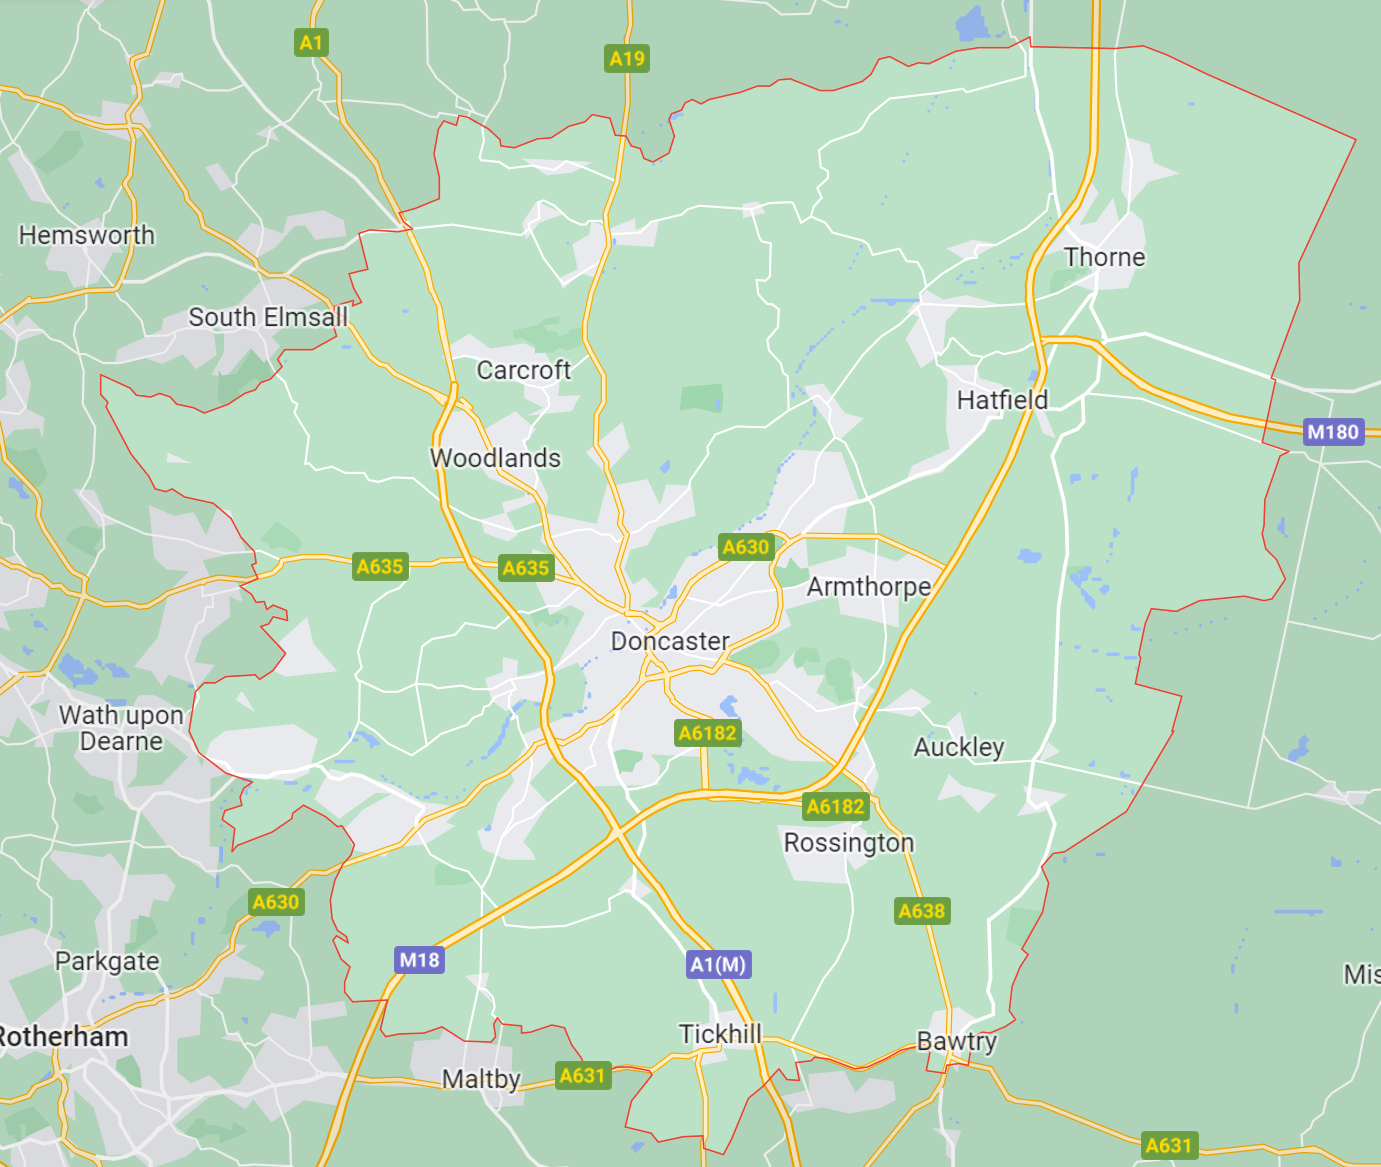 Map of Healthwatch Doncaster area